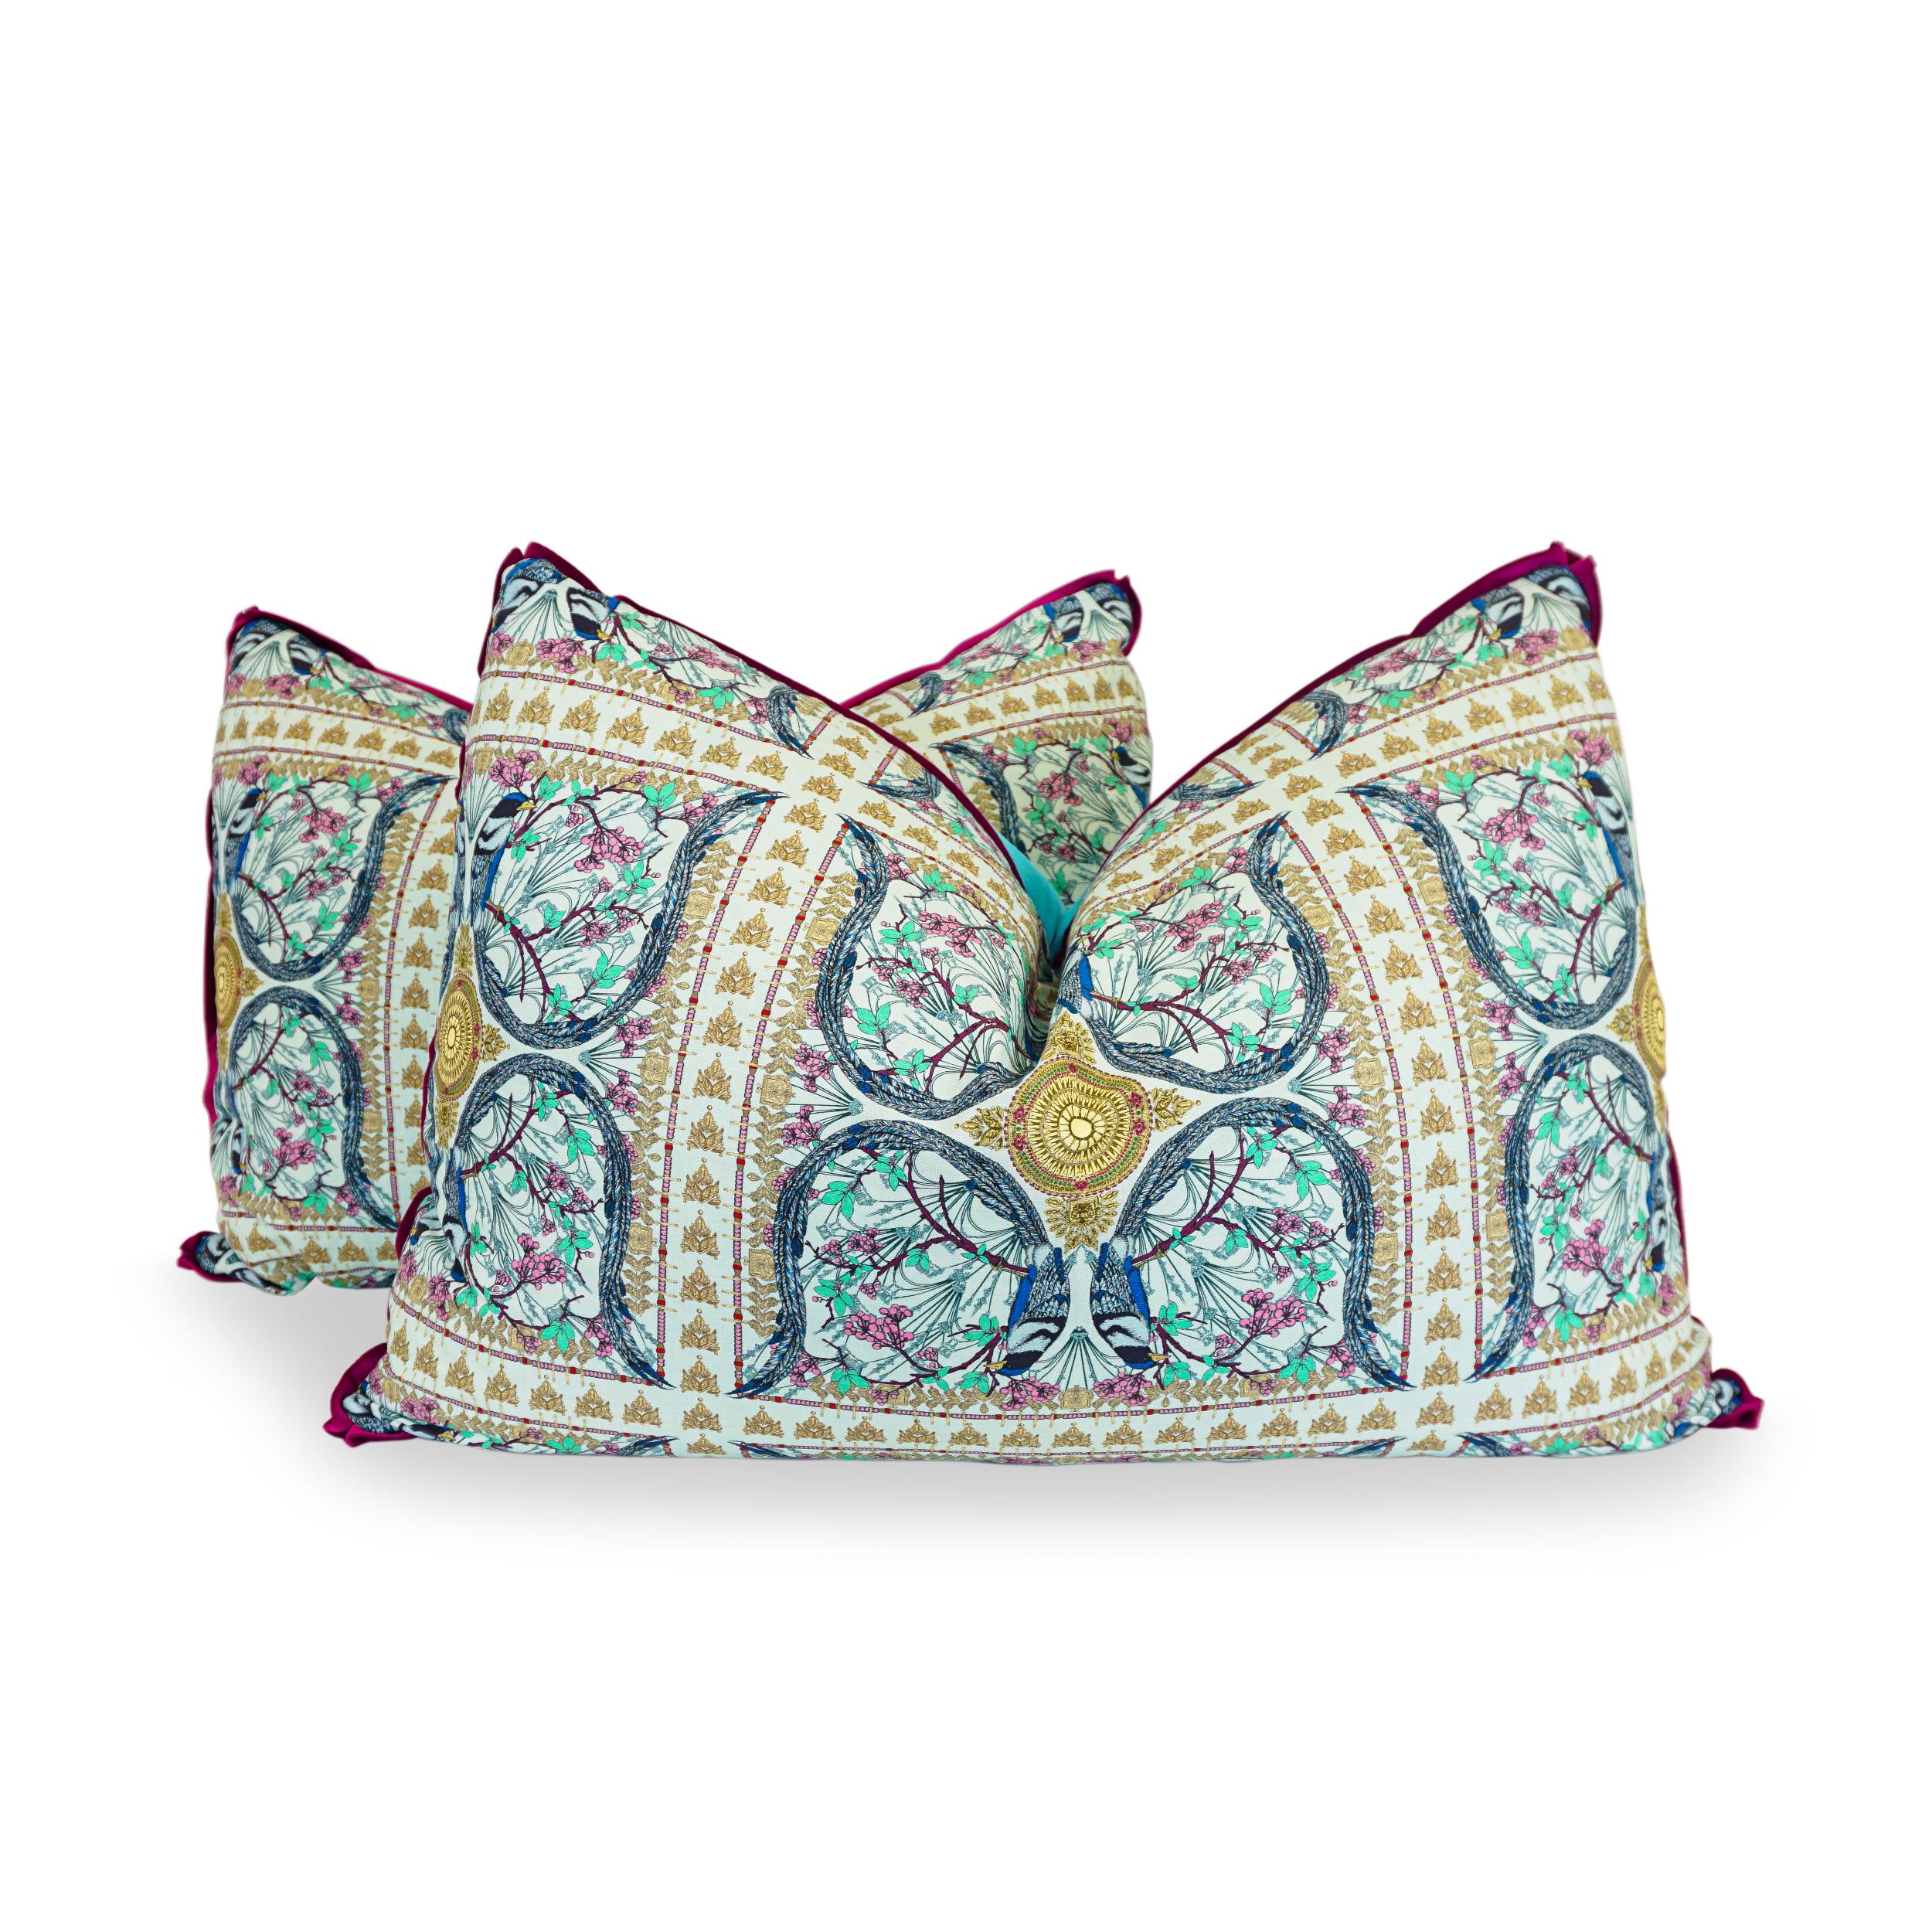 Contemporary Oversized Throw Pillow with Elaborate Printed Linen, Aqua Back and Berry Flange For Sale